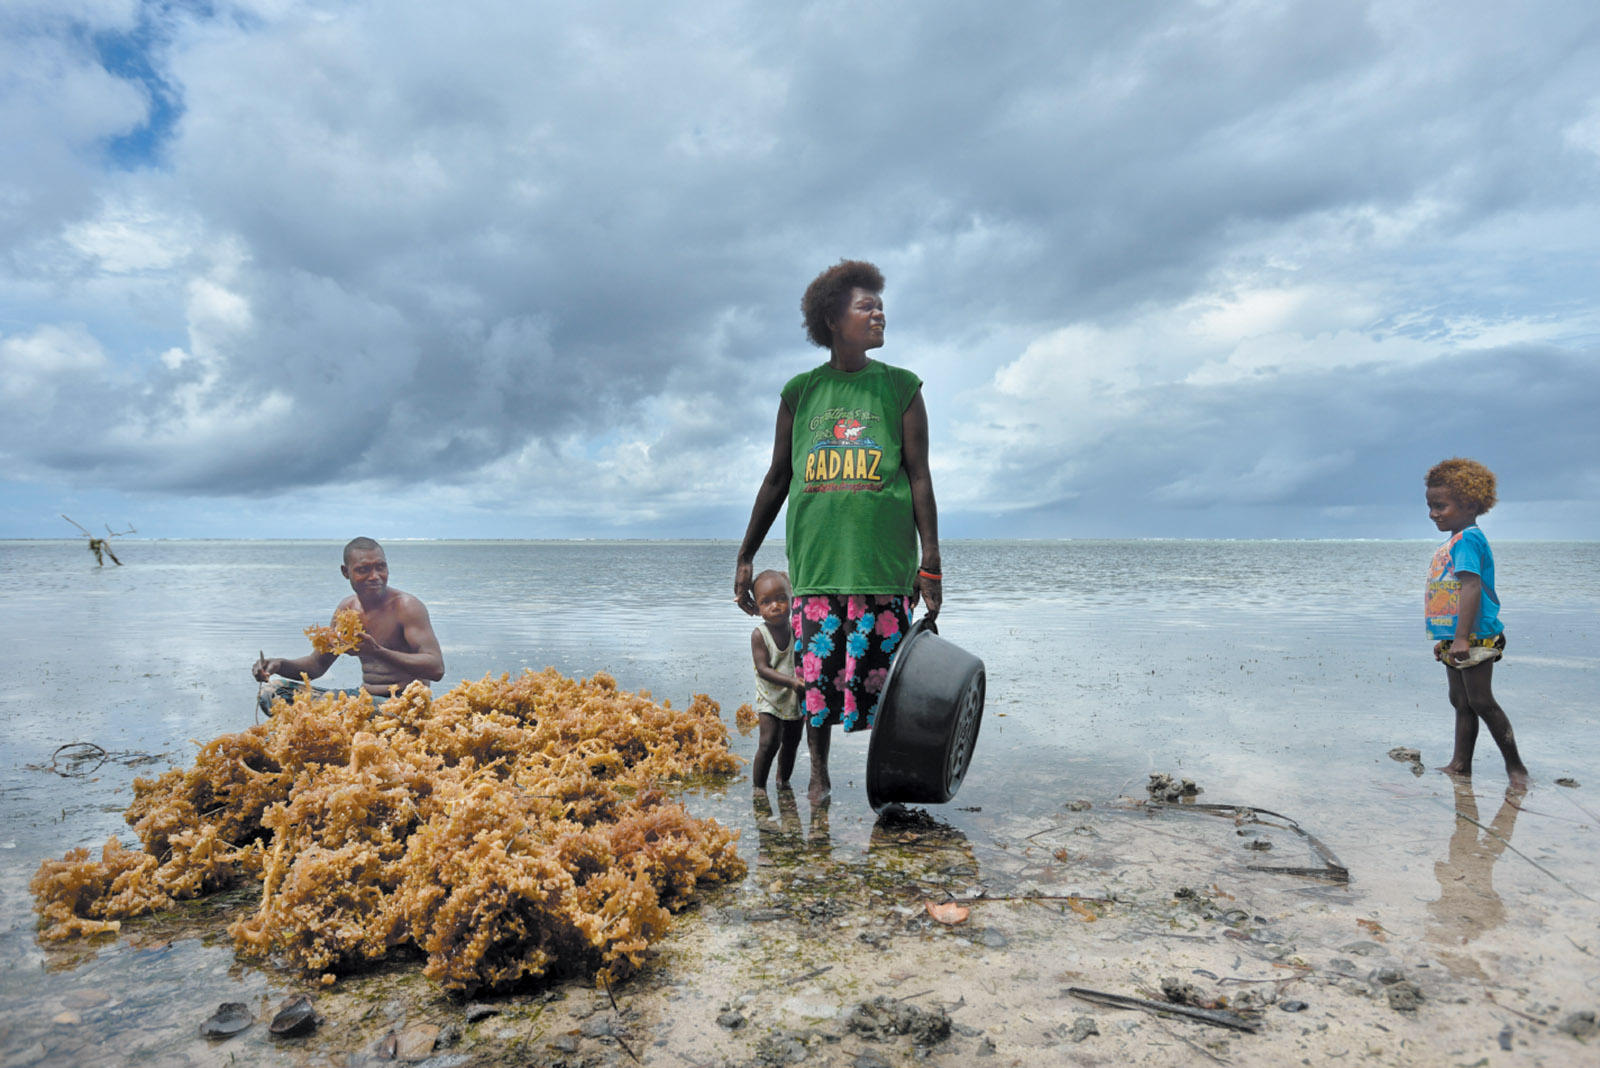 Papua New Guineans gathering seaweed for income in the Cartaret Islands, where rising sea levels are destroying their crops and drinking water, May 2013